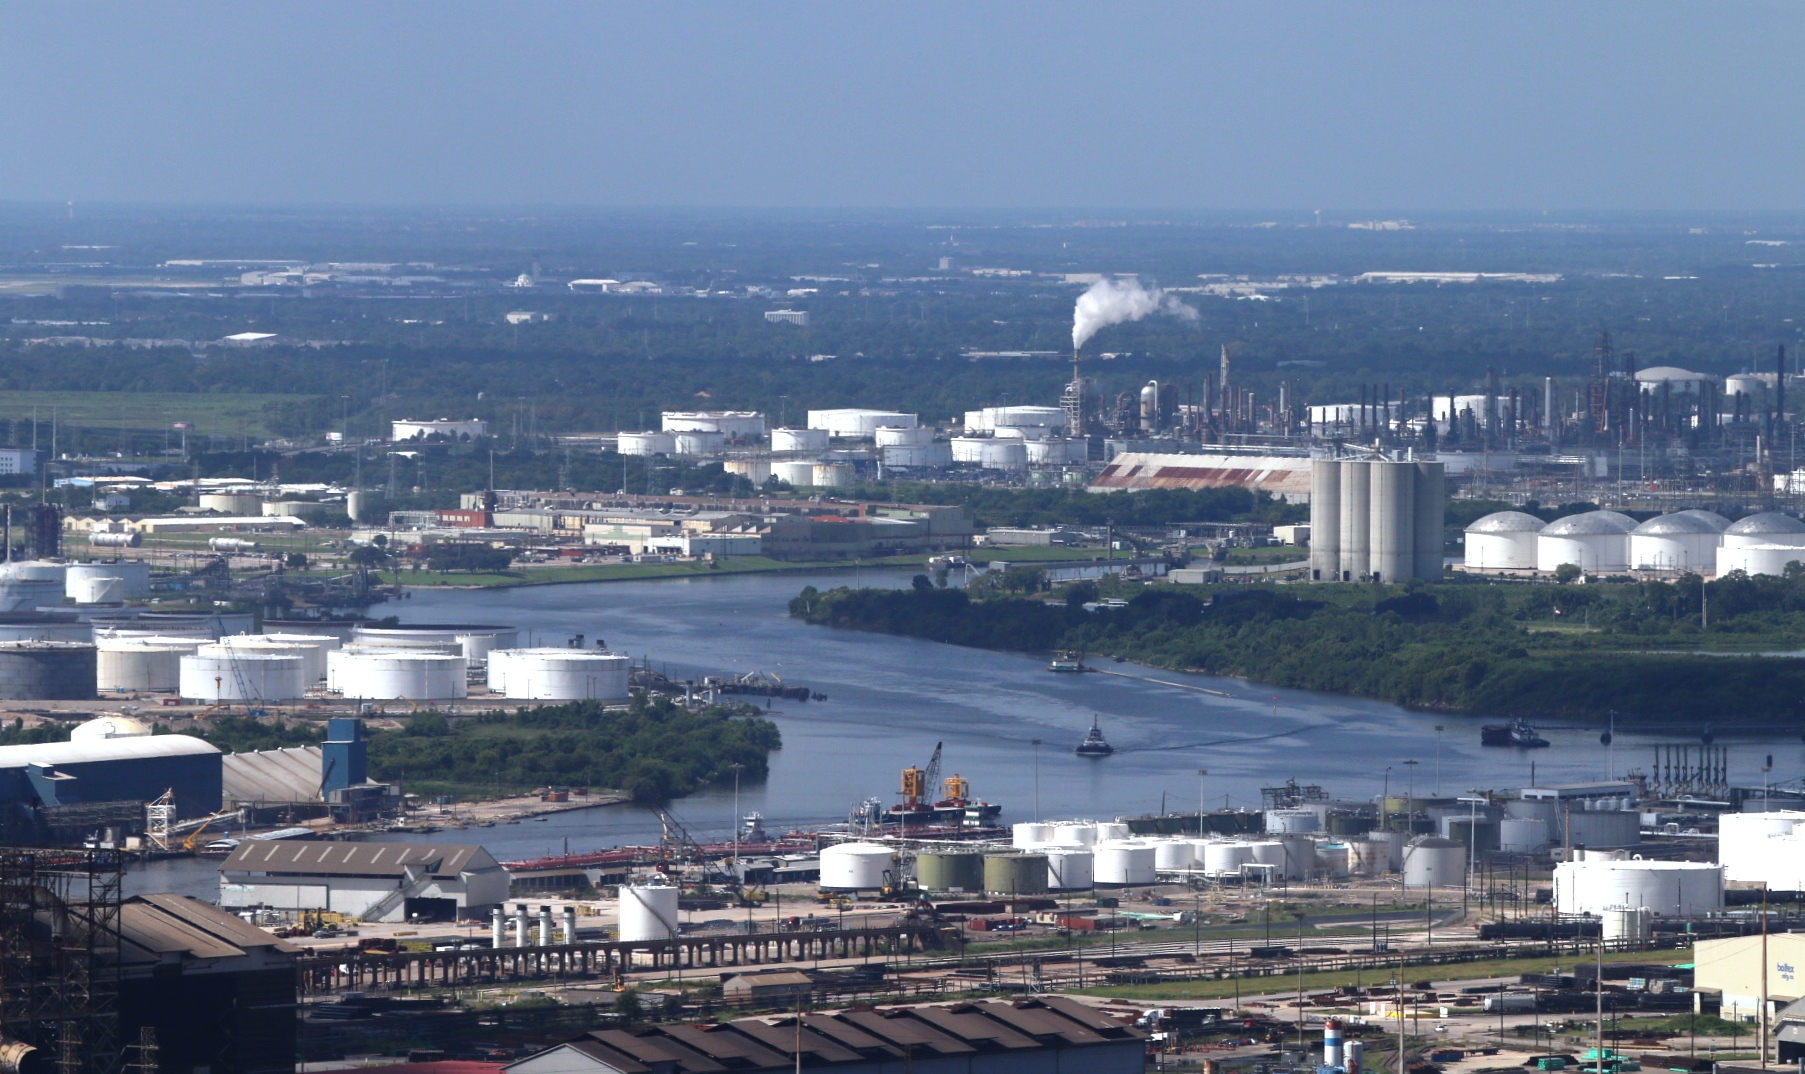 A view of petrochemical and refining facilities near Houston, TX.